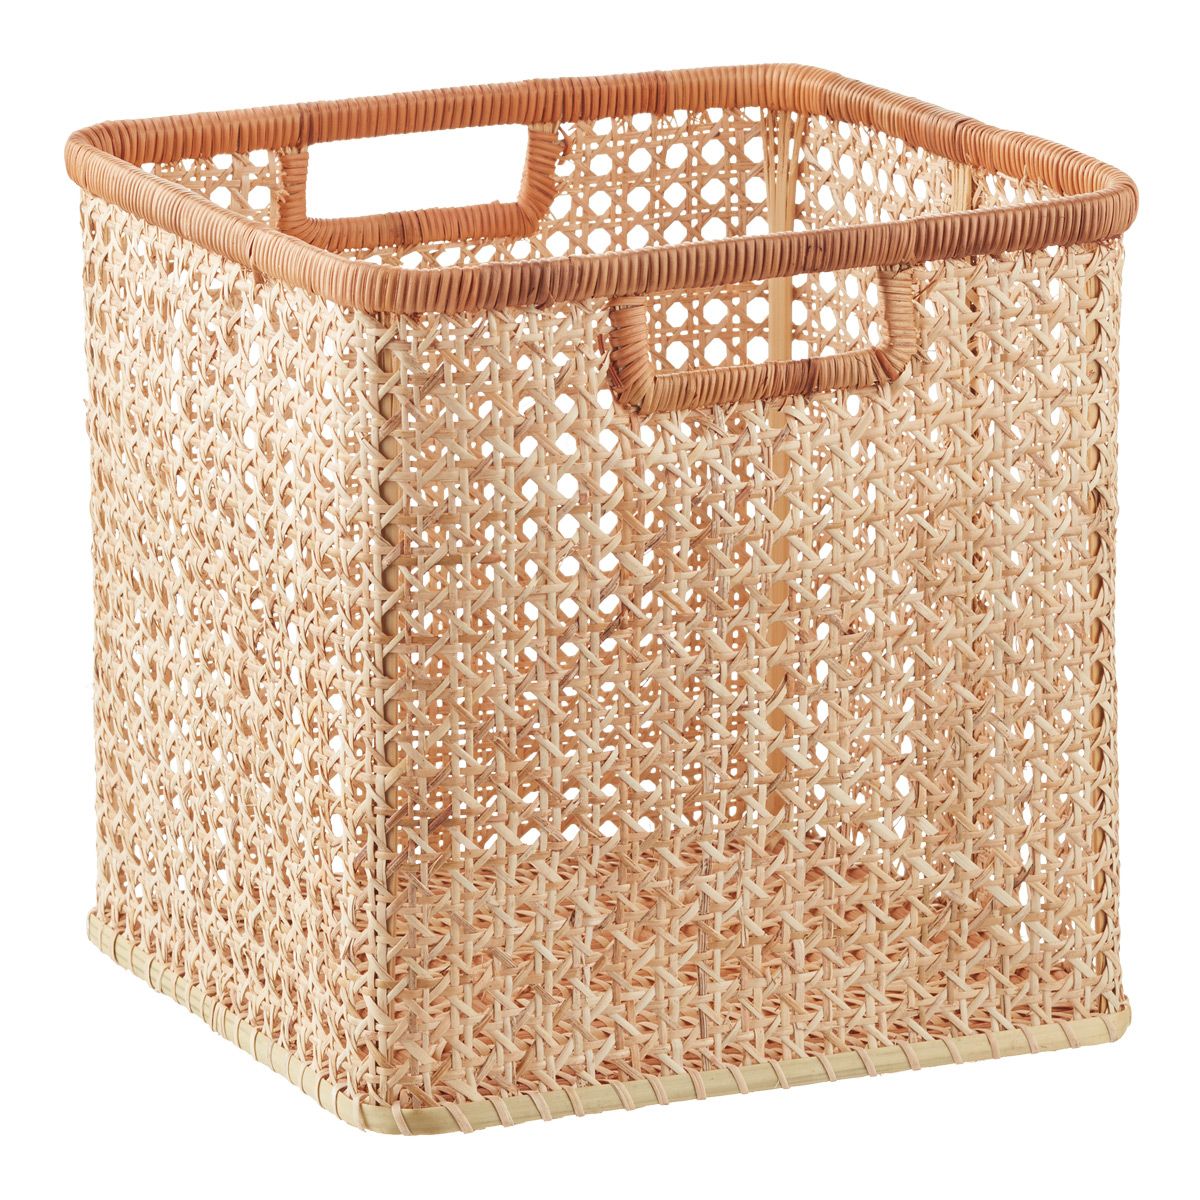 Albany Rattan Cube Natural | The Container Store